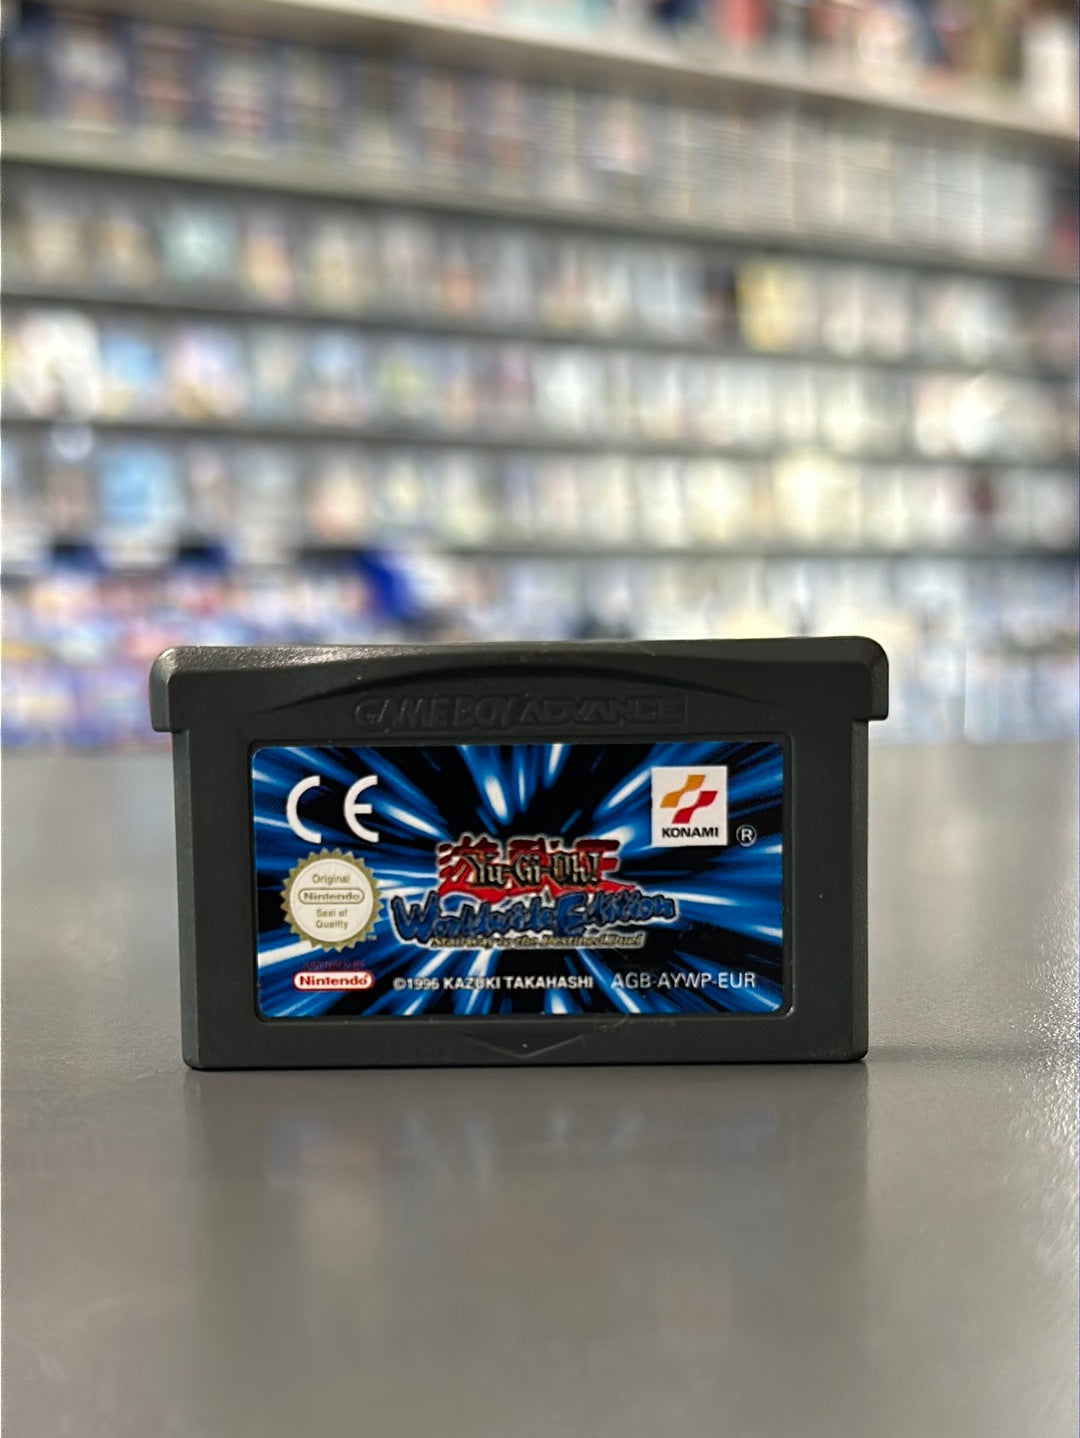 Nintendo Gameboy Advance Yu-Gi-Oh Wordwide Edition Starway to the Destined Duel